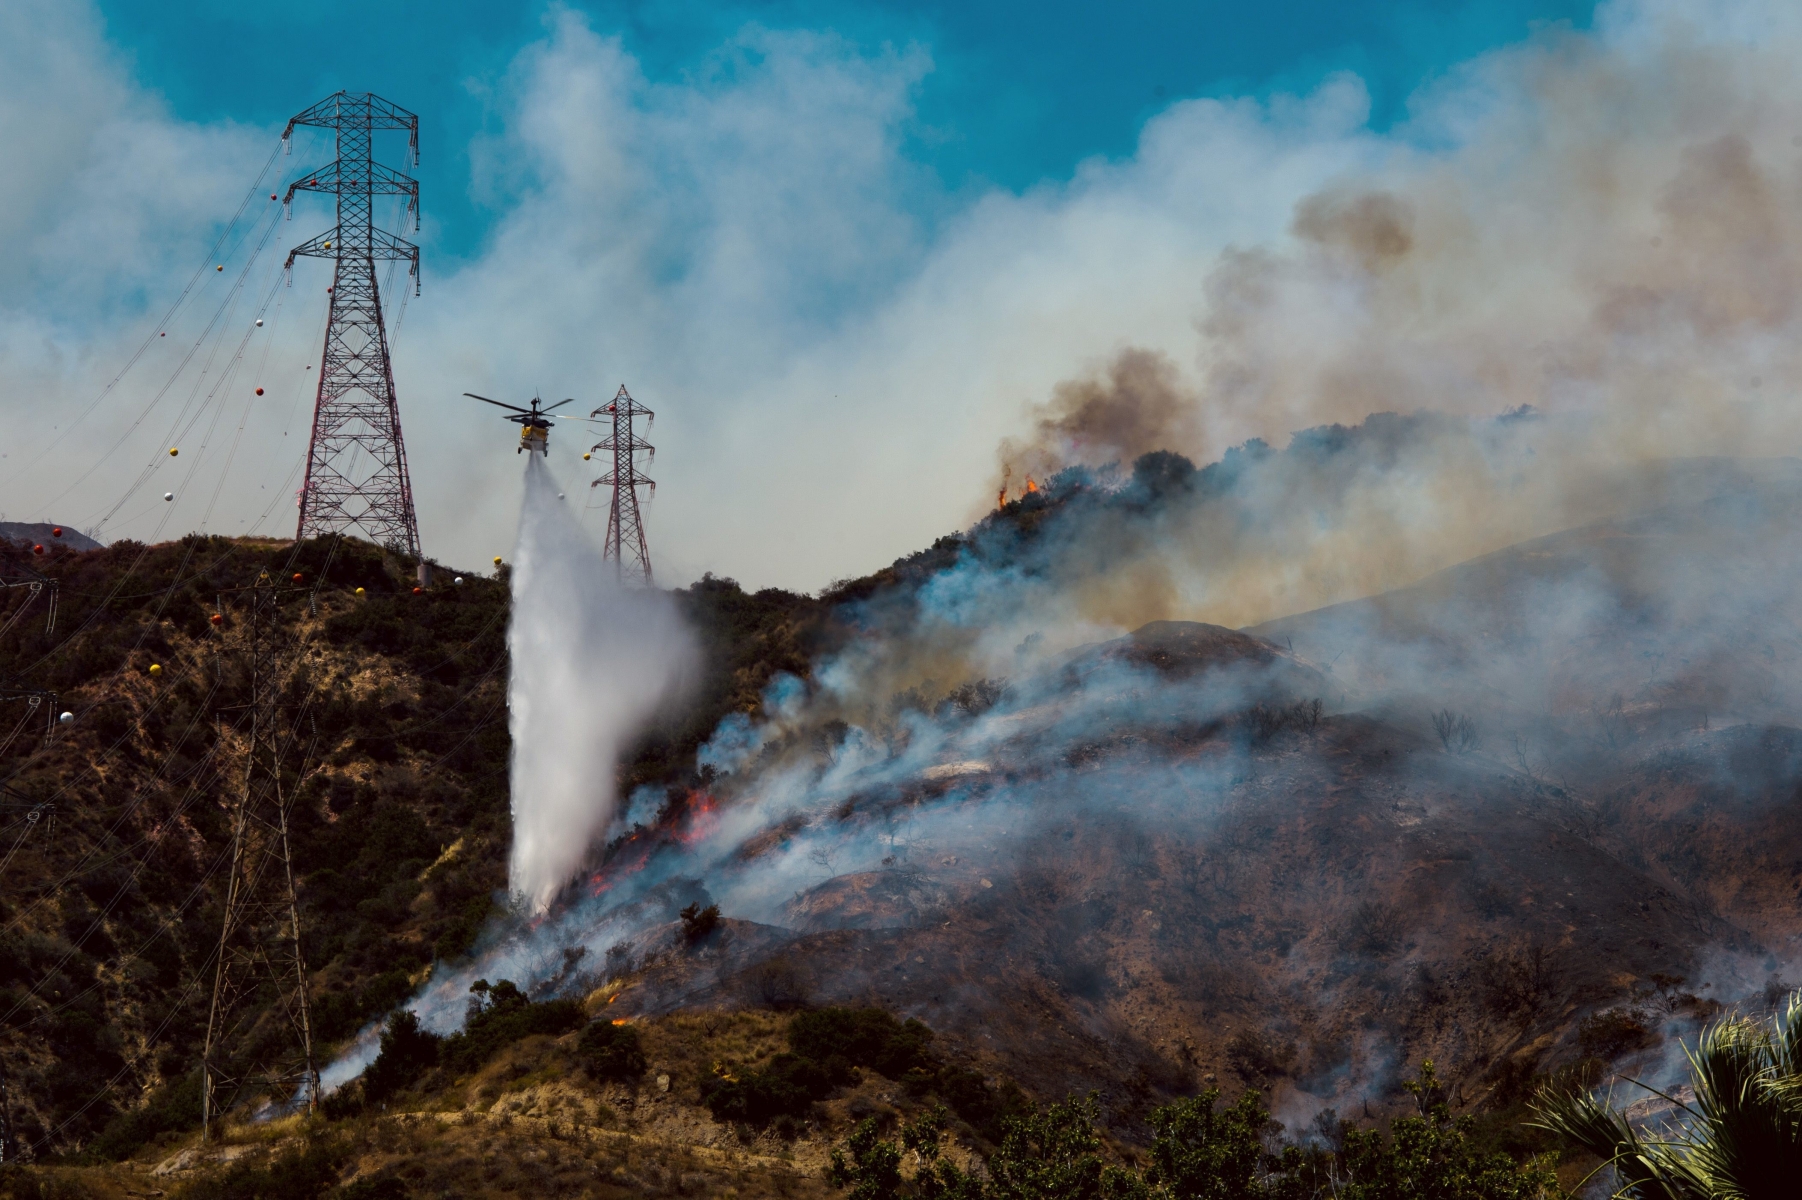 A fire helicopter makes a water drop on hotspots burning in Duarte, Calif., Monday, June 20, 2016. Police in the city of Azusa and parts of Duarte ordered hundreds of homes evacuated. Others were under voluntary evacuations. (Watchara Phomicinda/San Gabriel Valley Tribune via AP) MANDATORY CREDIT Western Wildfires